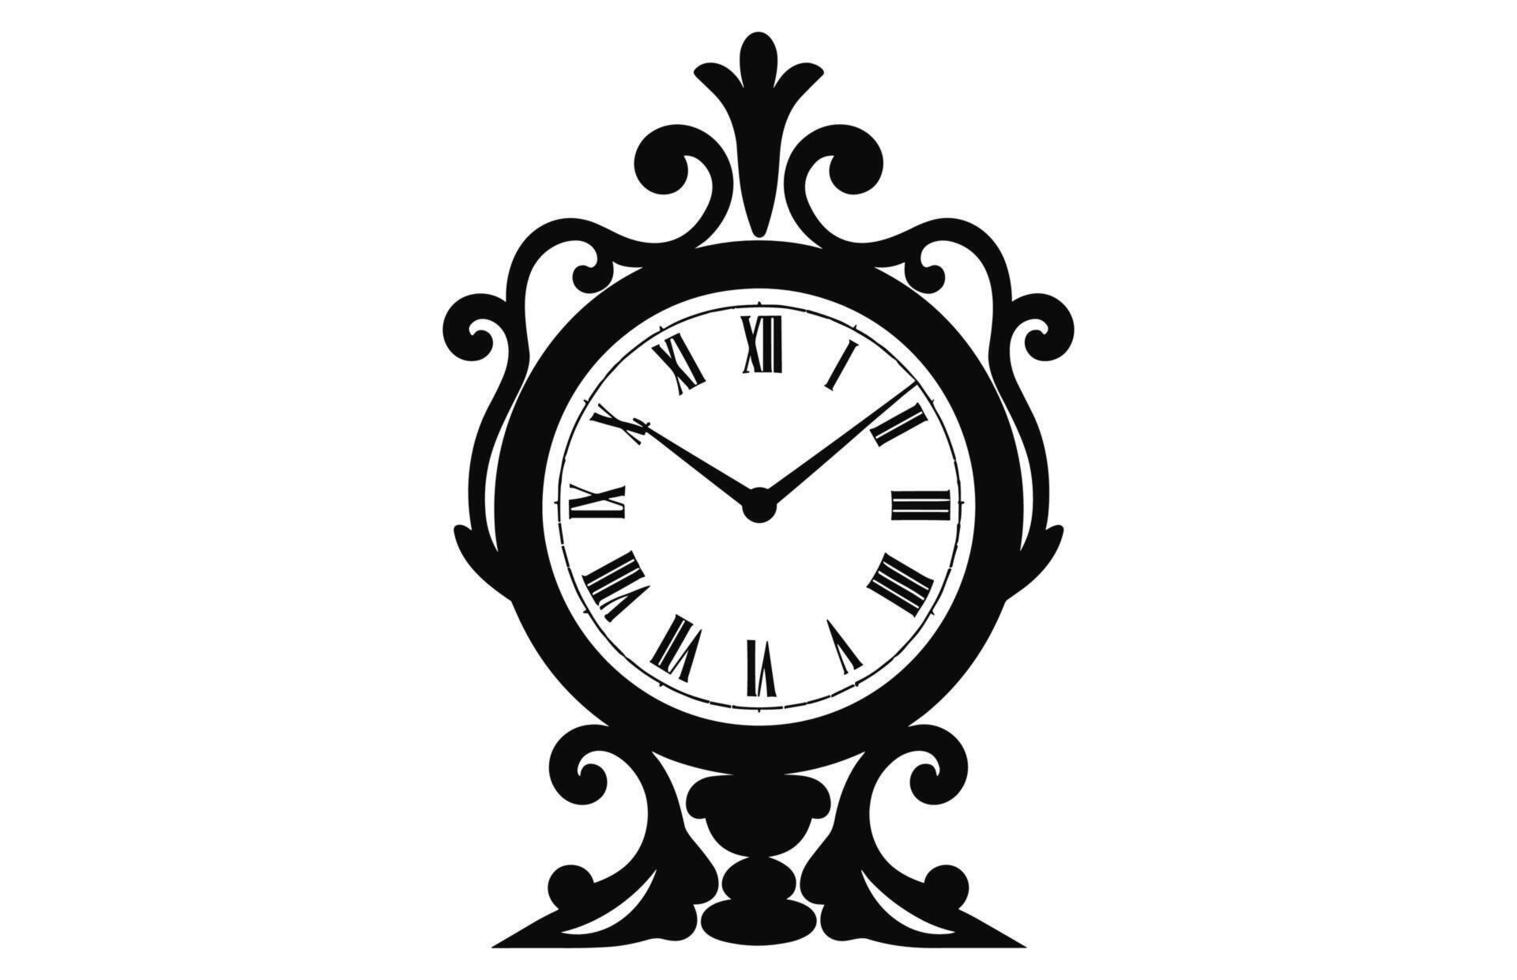 A Vintage clock vector black silhouette isolated on a white background